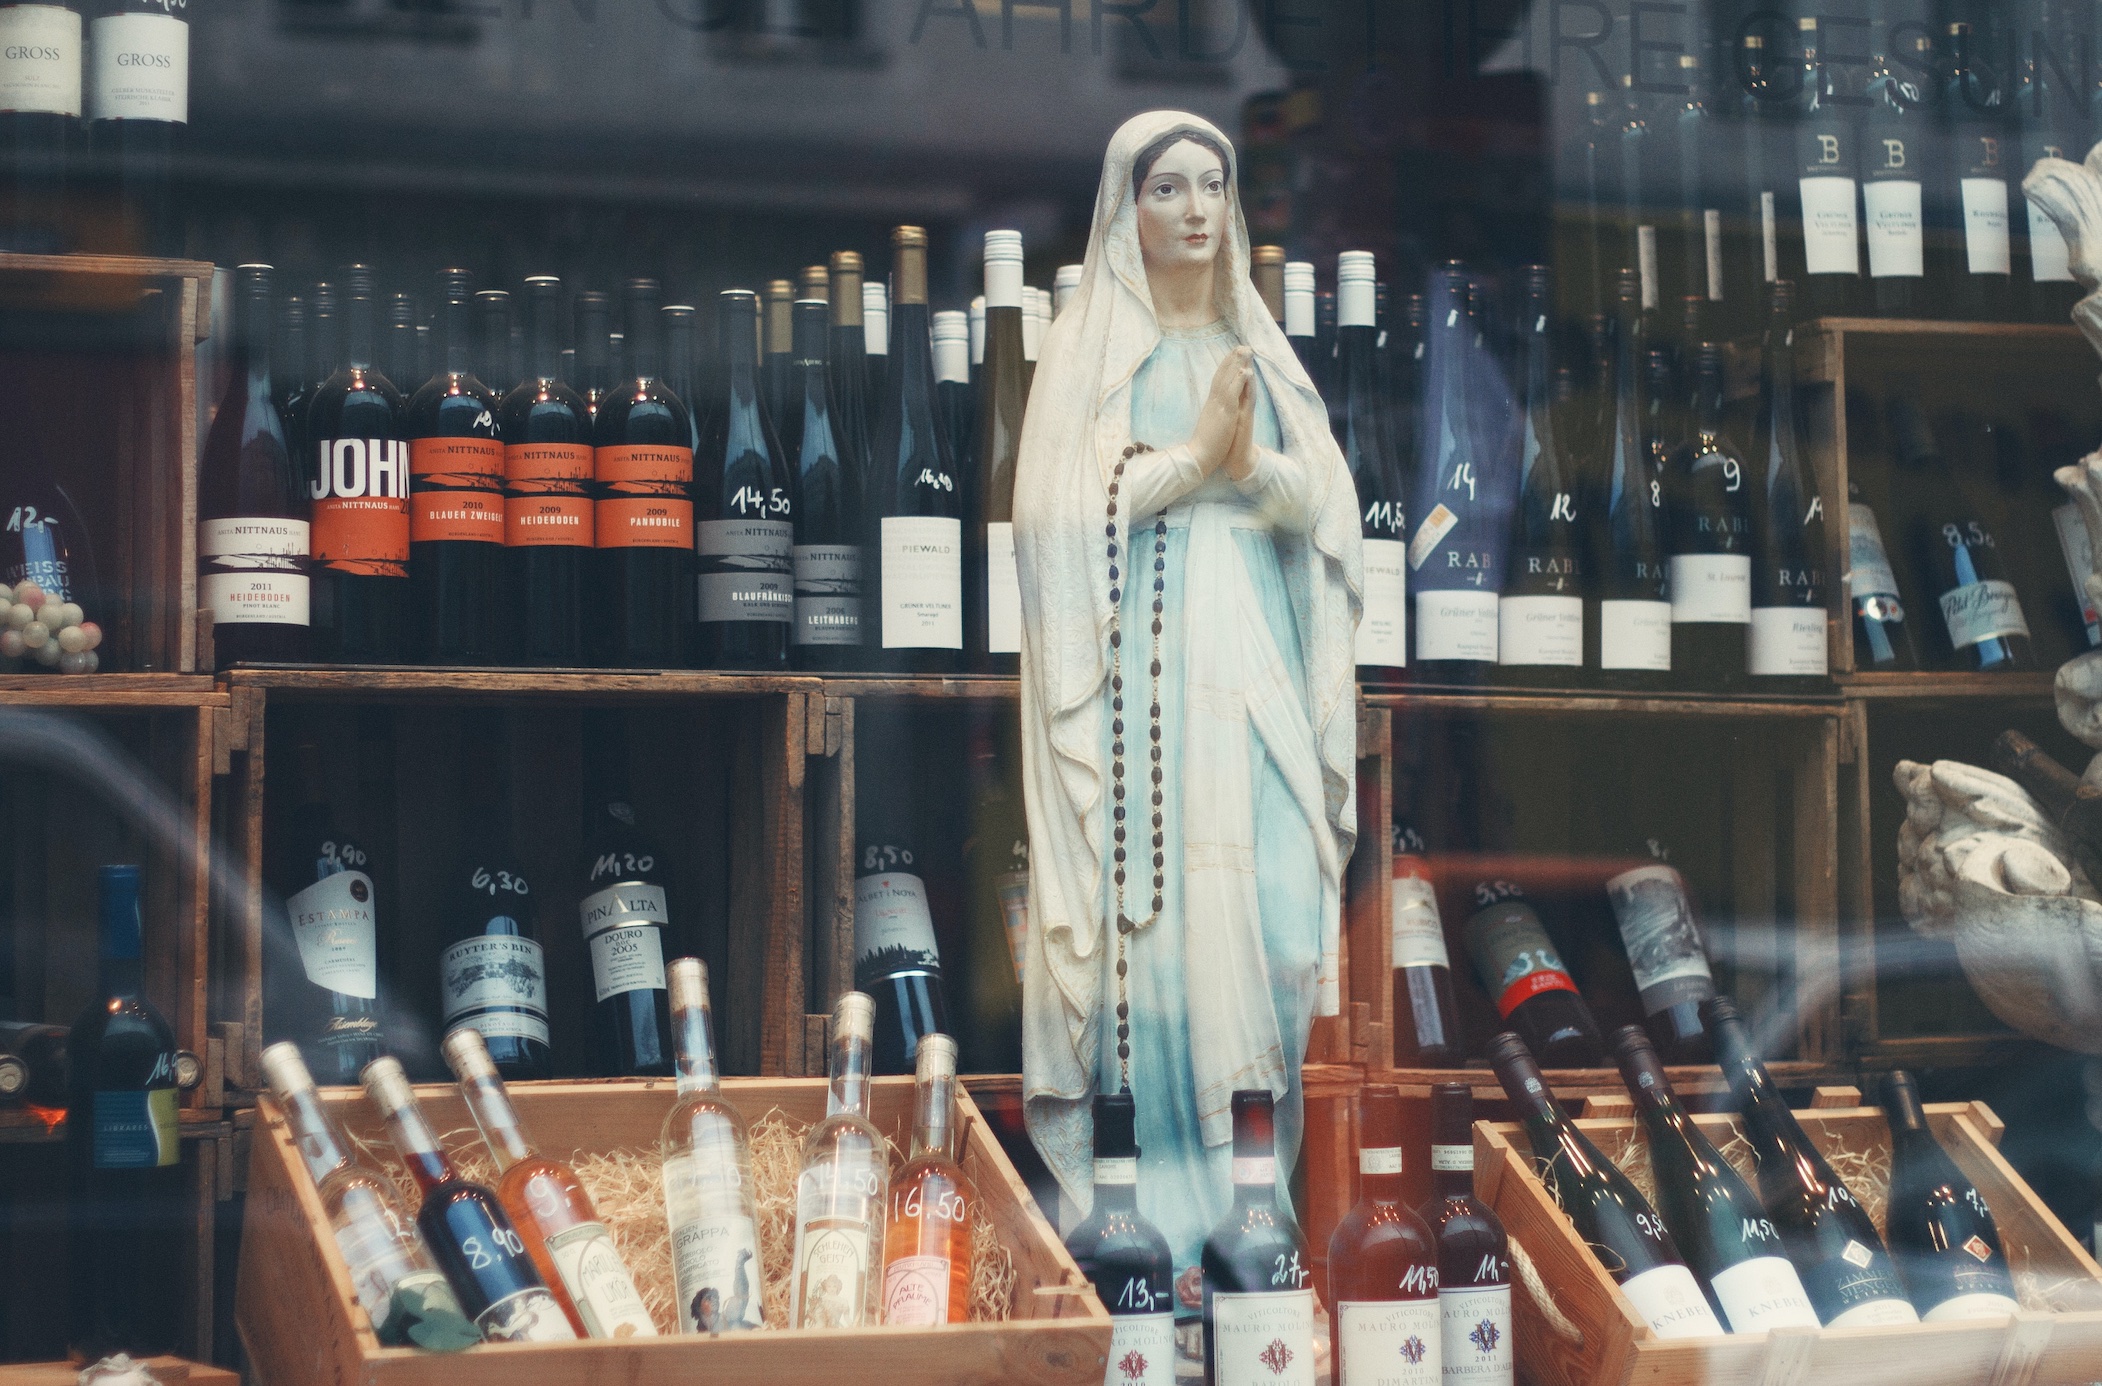 Statue of the Virgin Mary among wine bottles at store; image by Alina Sofia, via Unsplash.com.